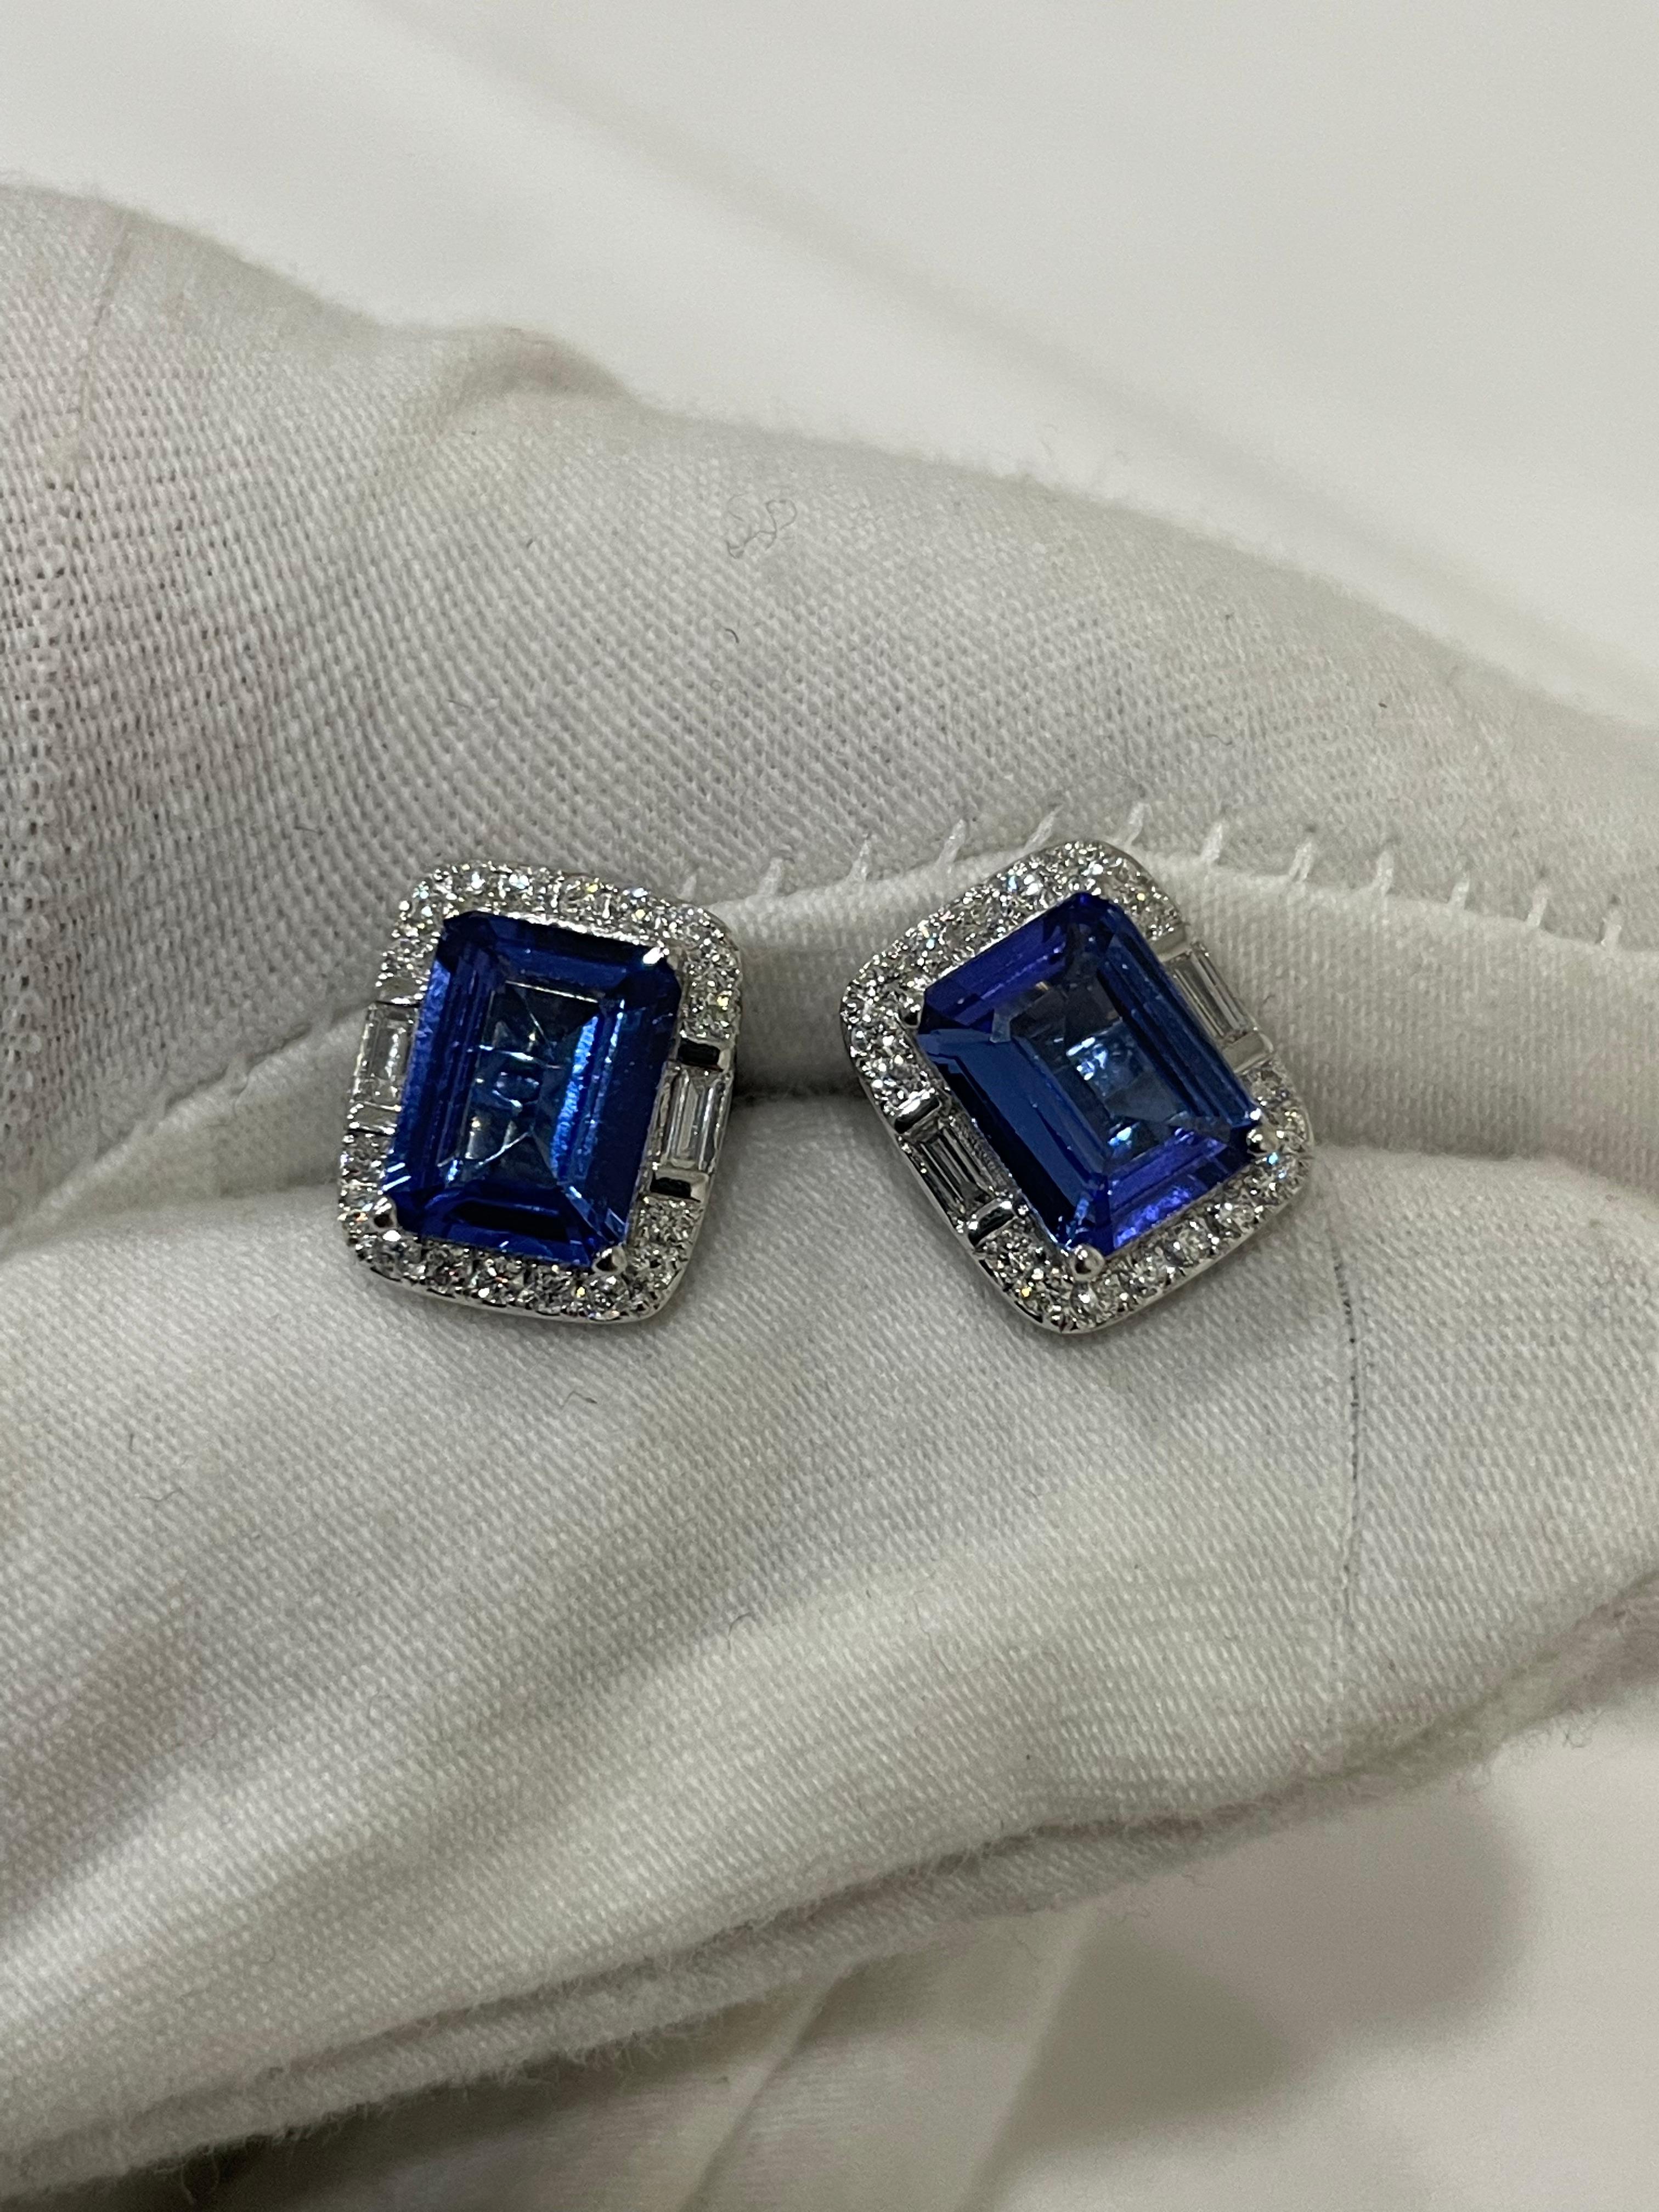 Women's 2.85 Carat Natural Tanzanite and Diamond Stud Earrings in 18K White Gold For Sale